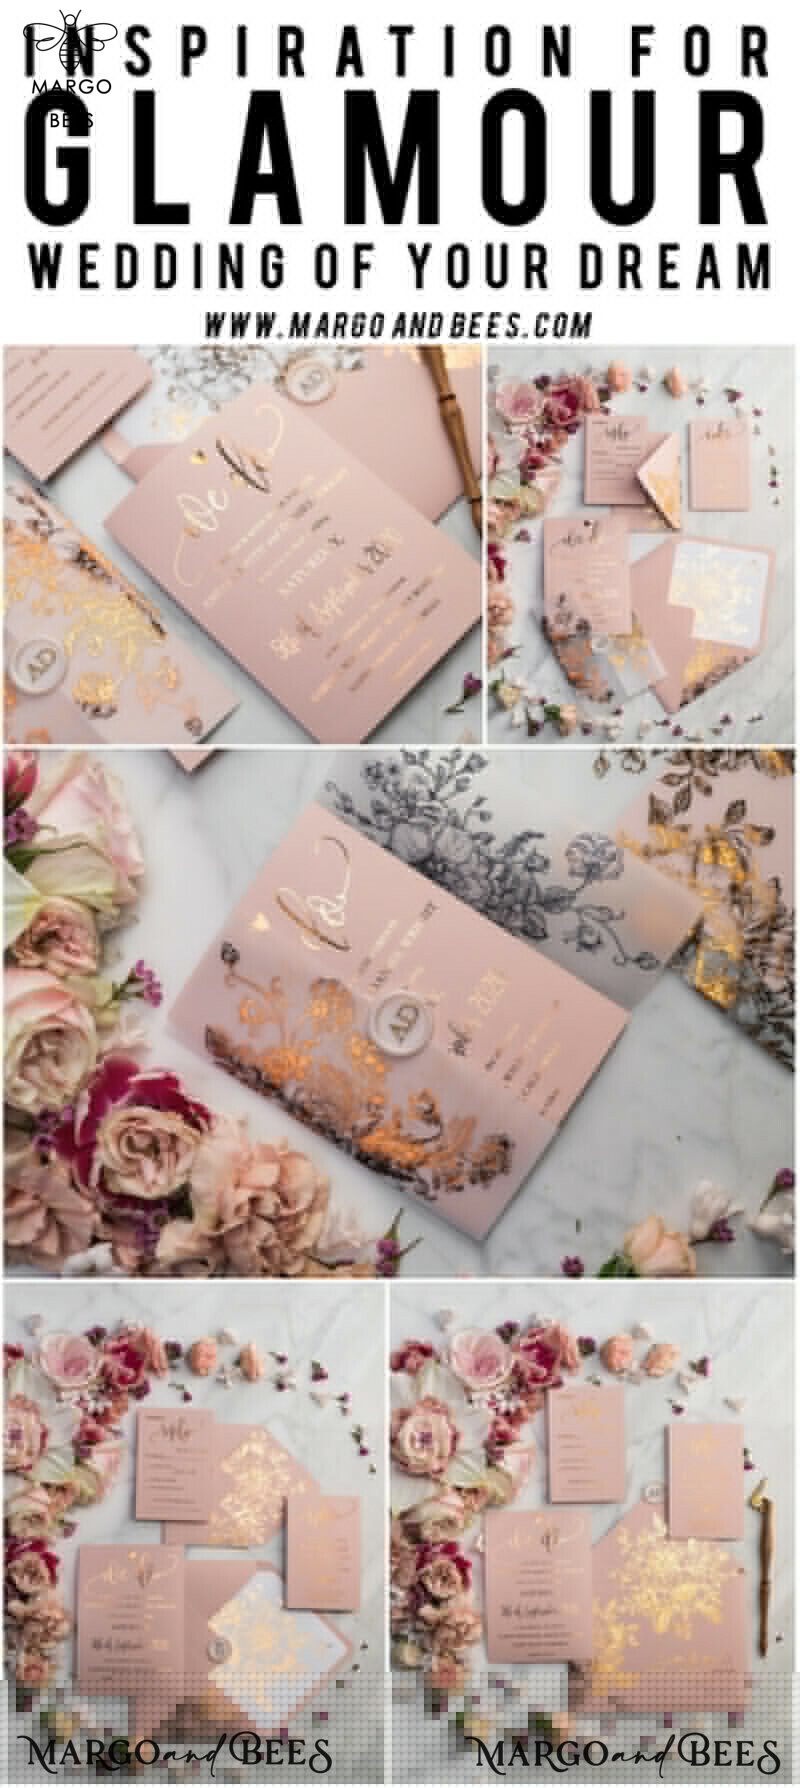 Luxury Vellum Gold Foil Wedding Invitations: An Elegant Blush Pink Invitation Suite with Glamour and Golden Shine-61